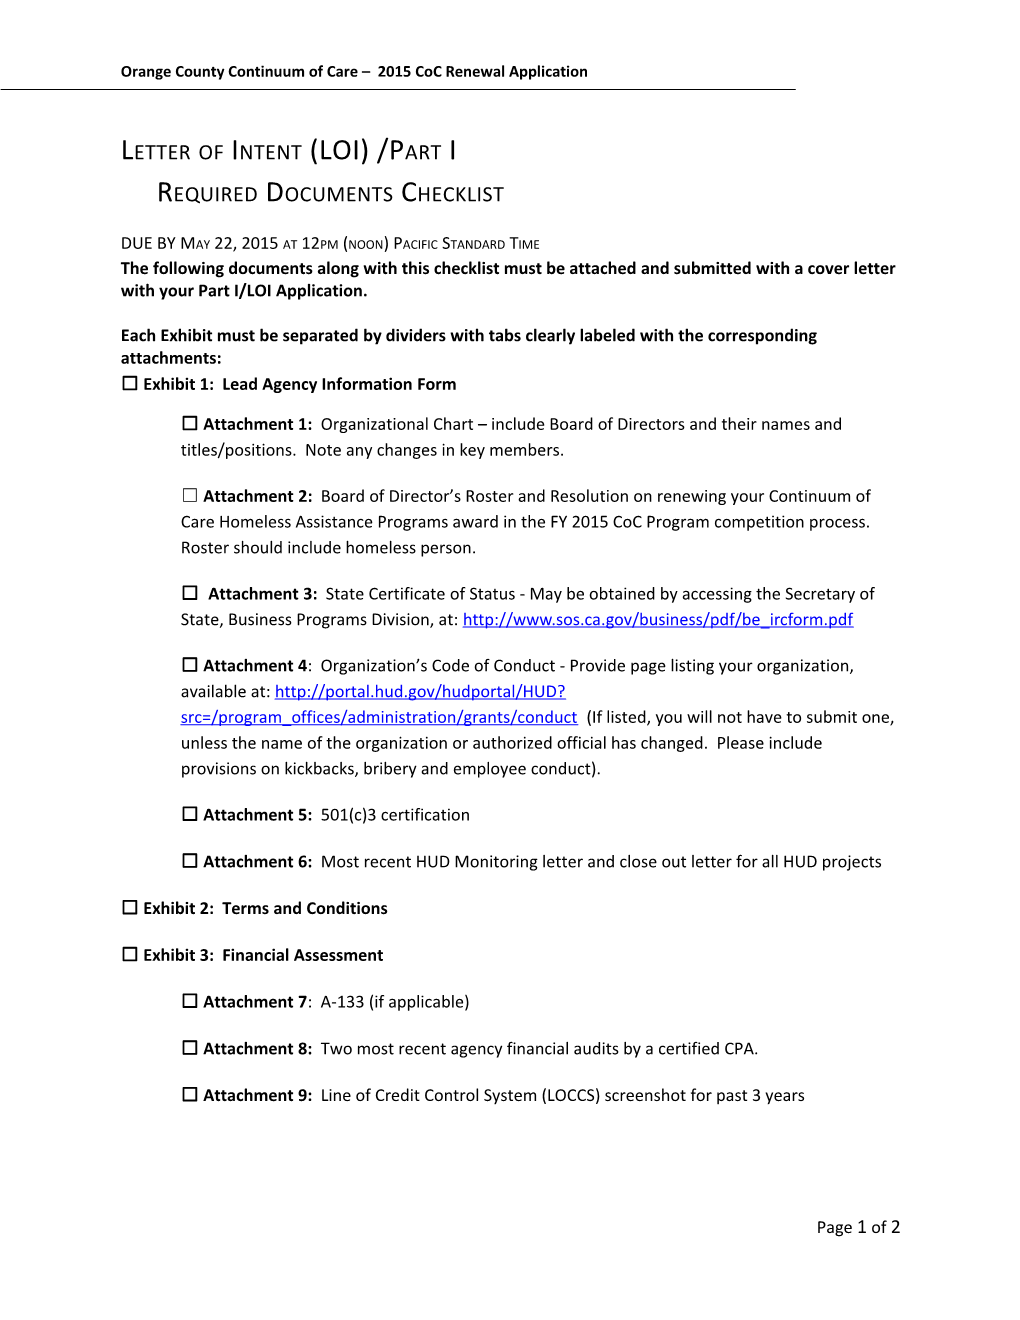 Letter of Intent (LOI)/Part I Required Documents Checklist